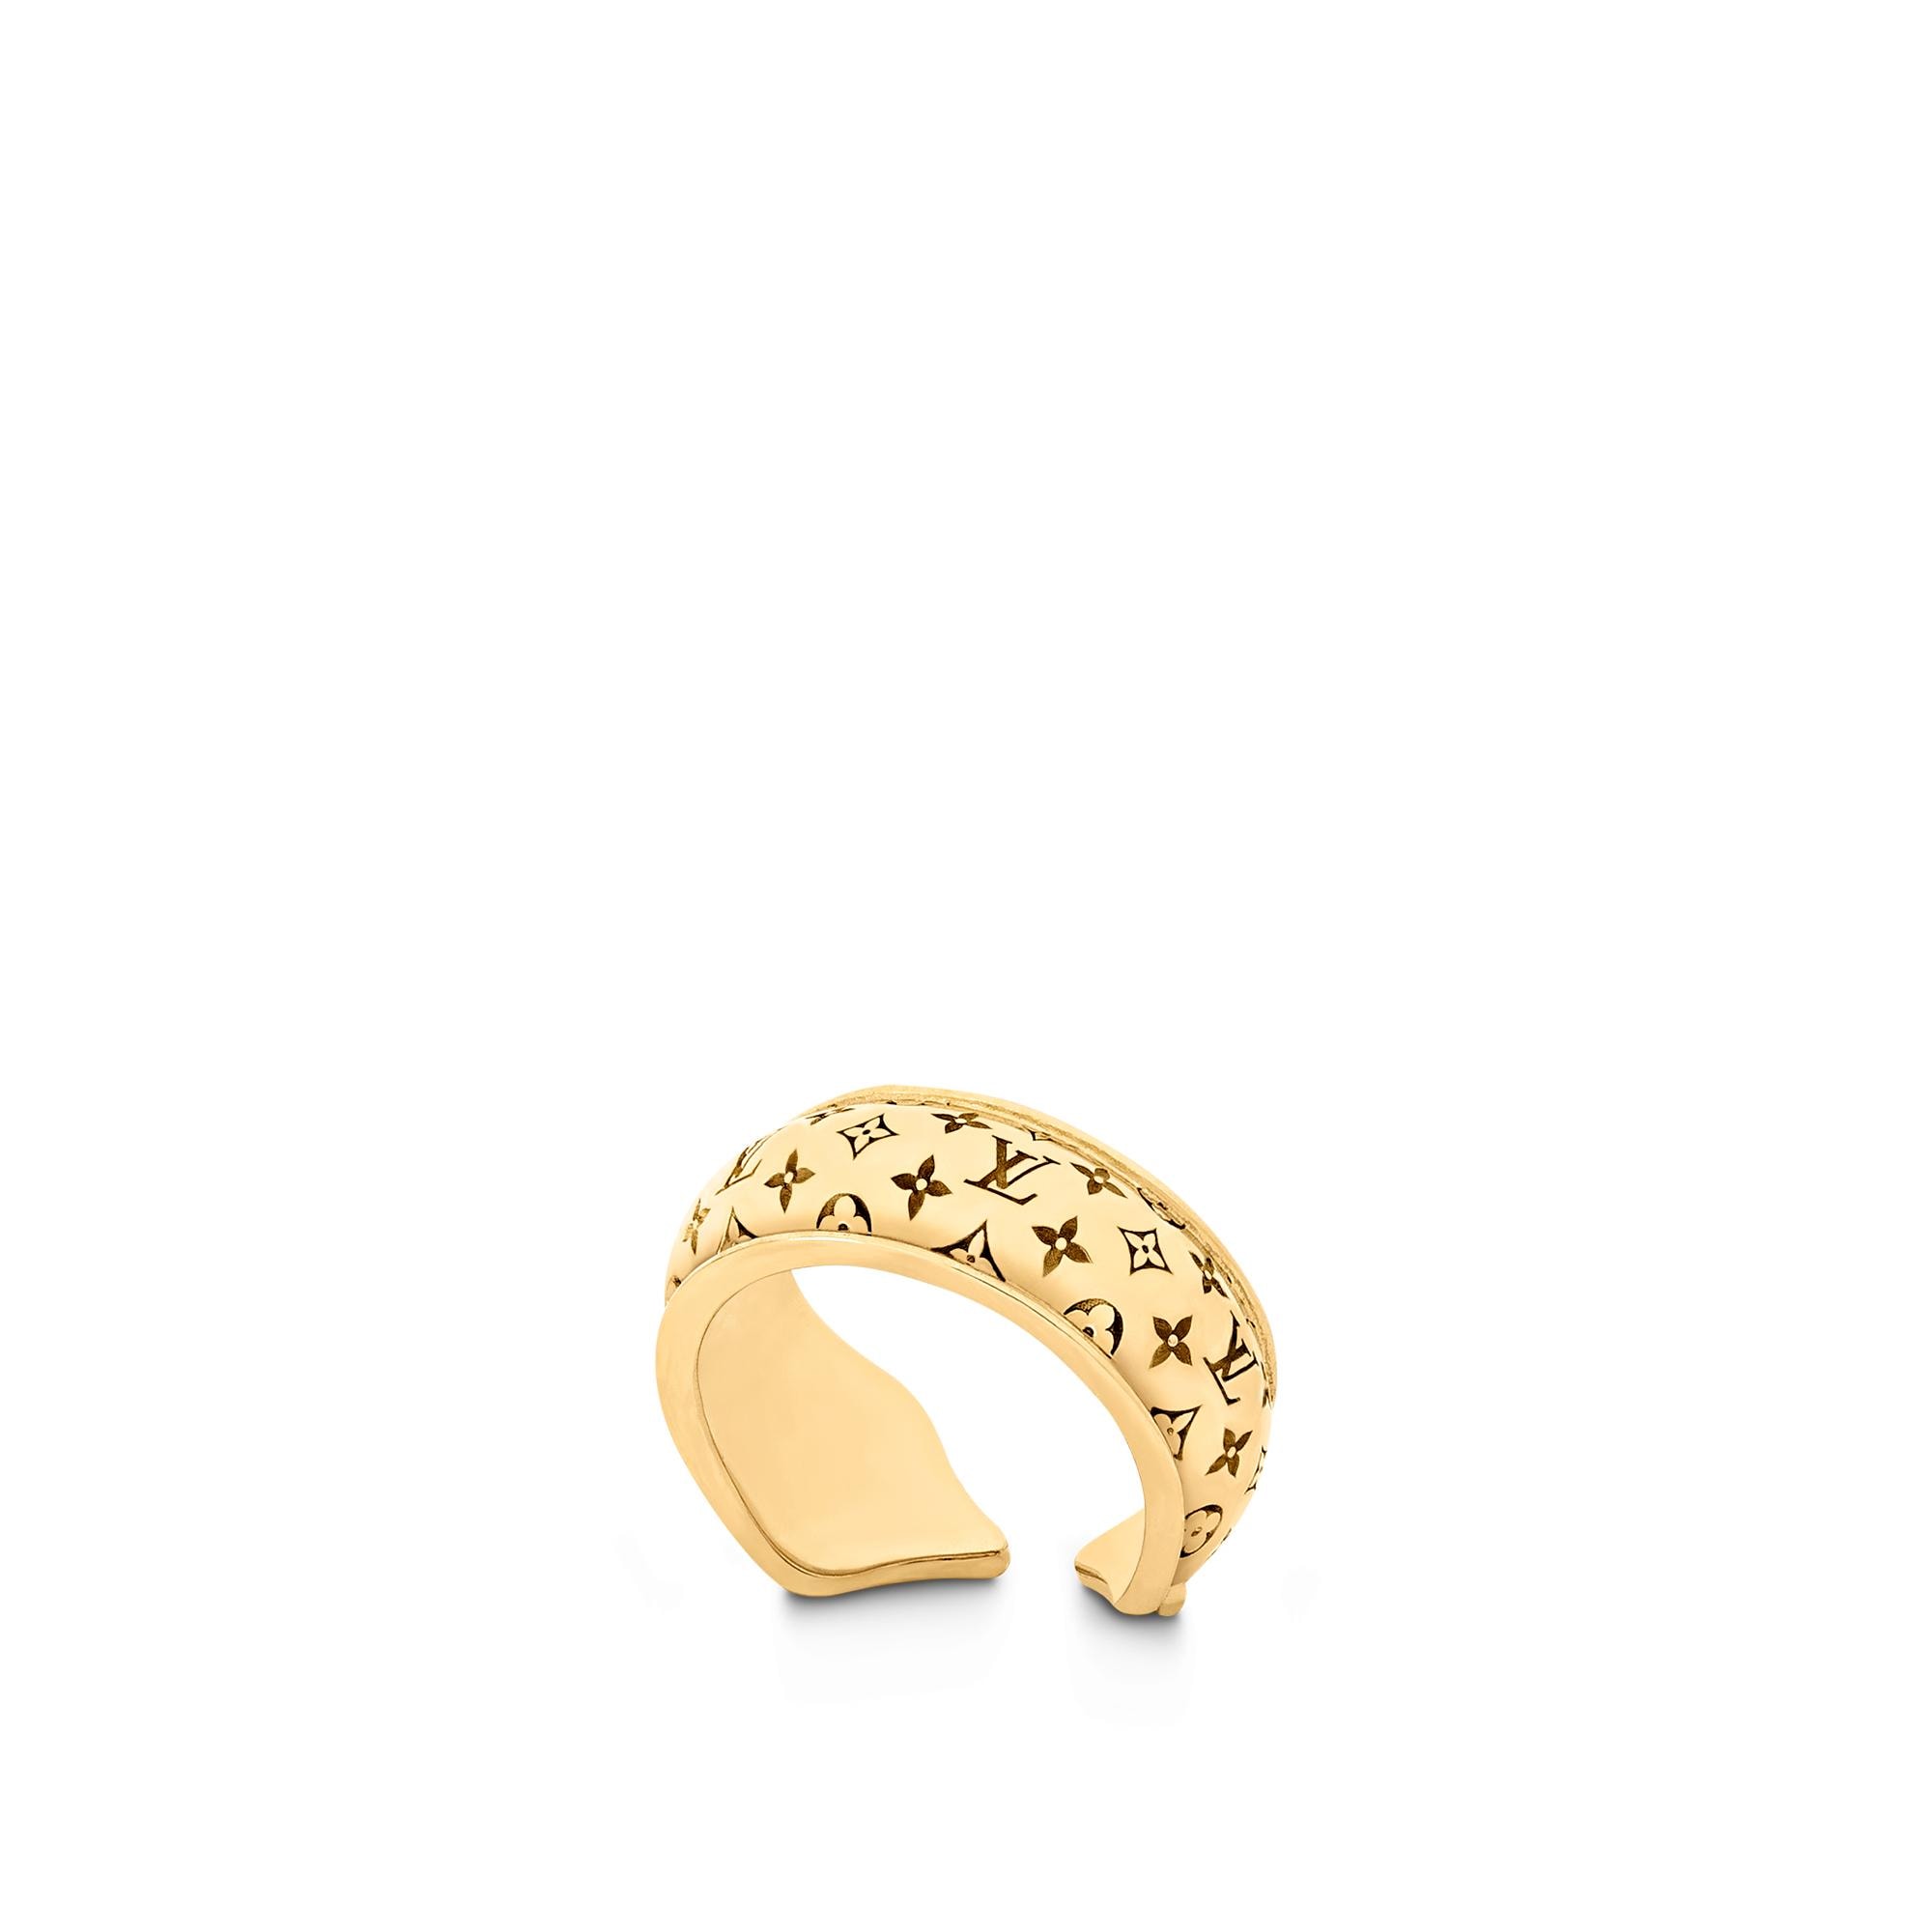 Sold at Auction: Louis Vuitton Nanogram Sweet Dreams Ring (Sold Out)